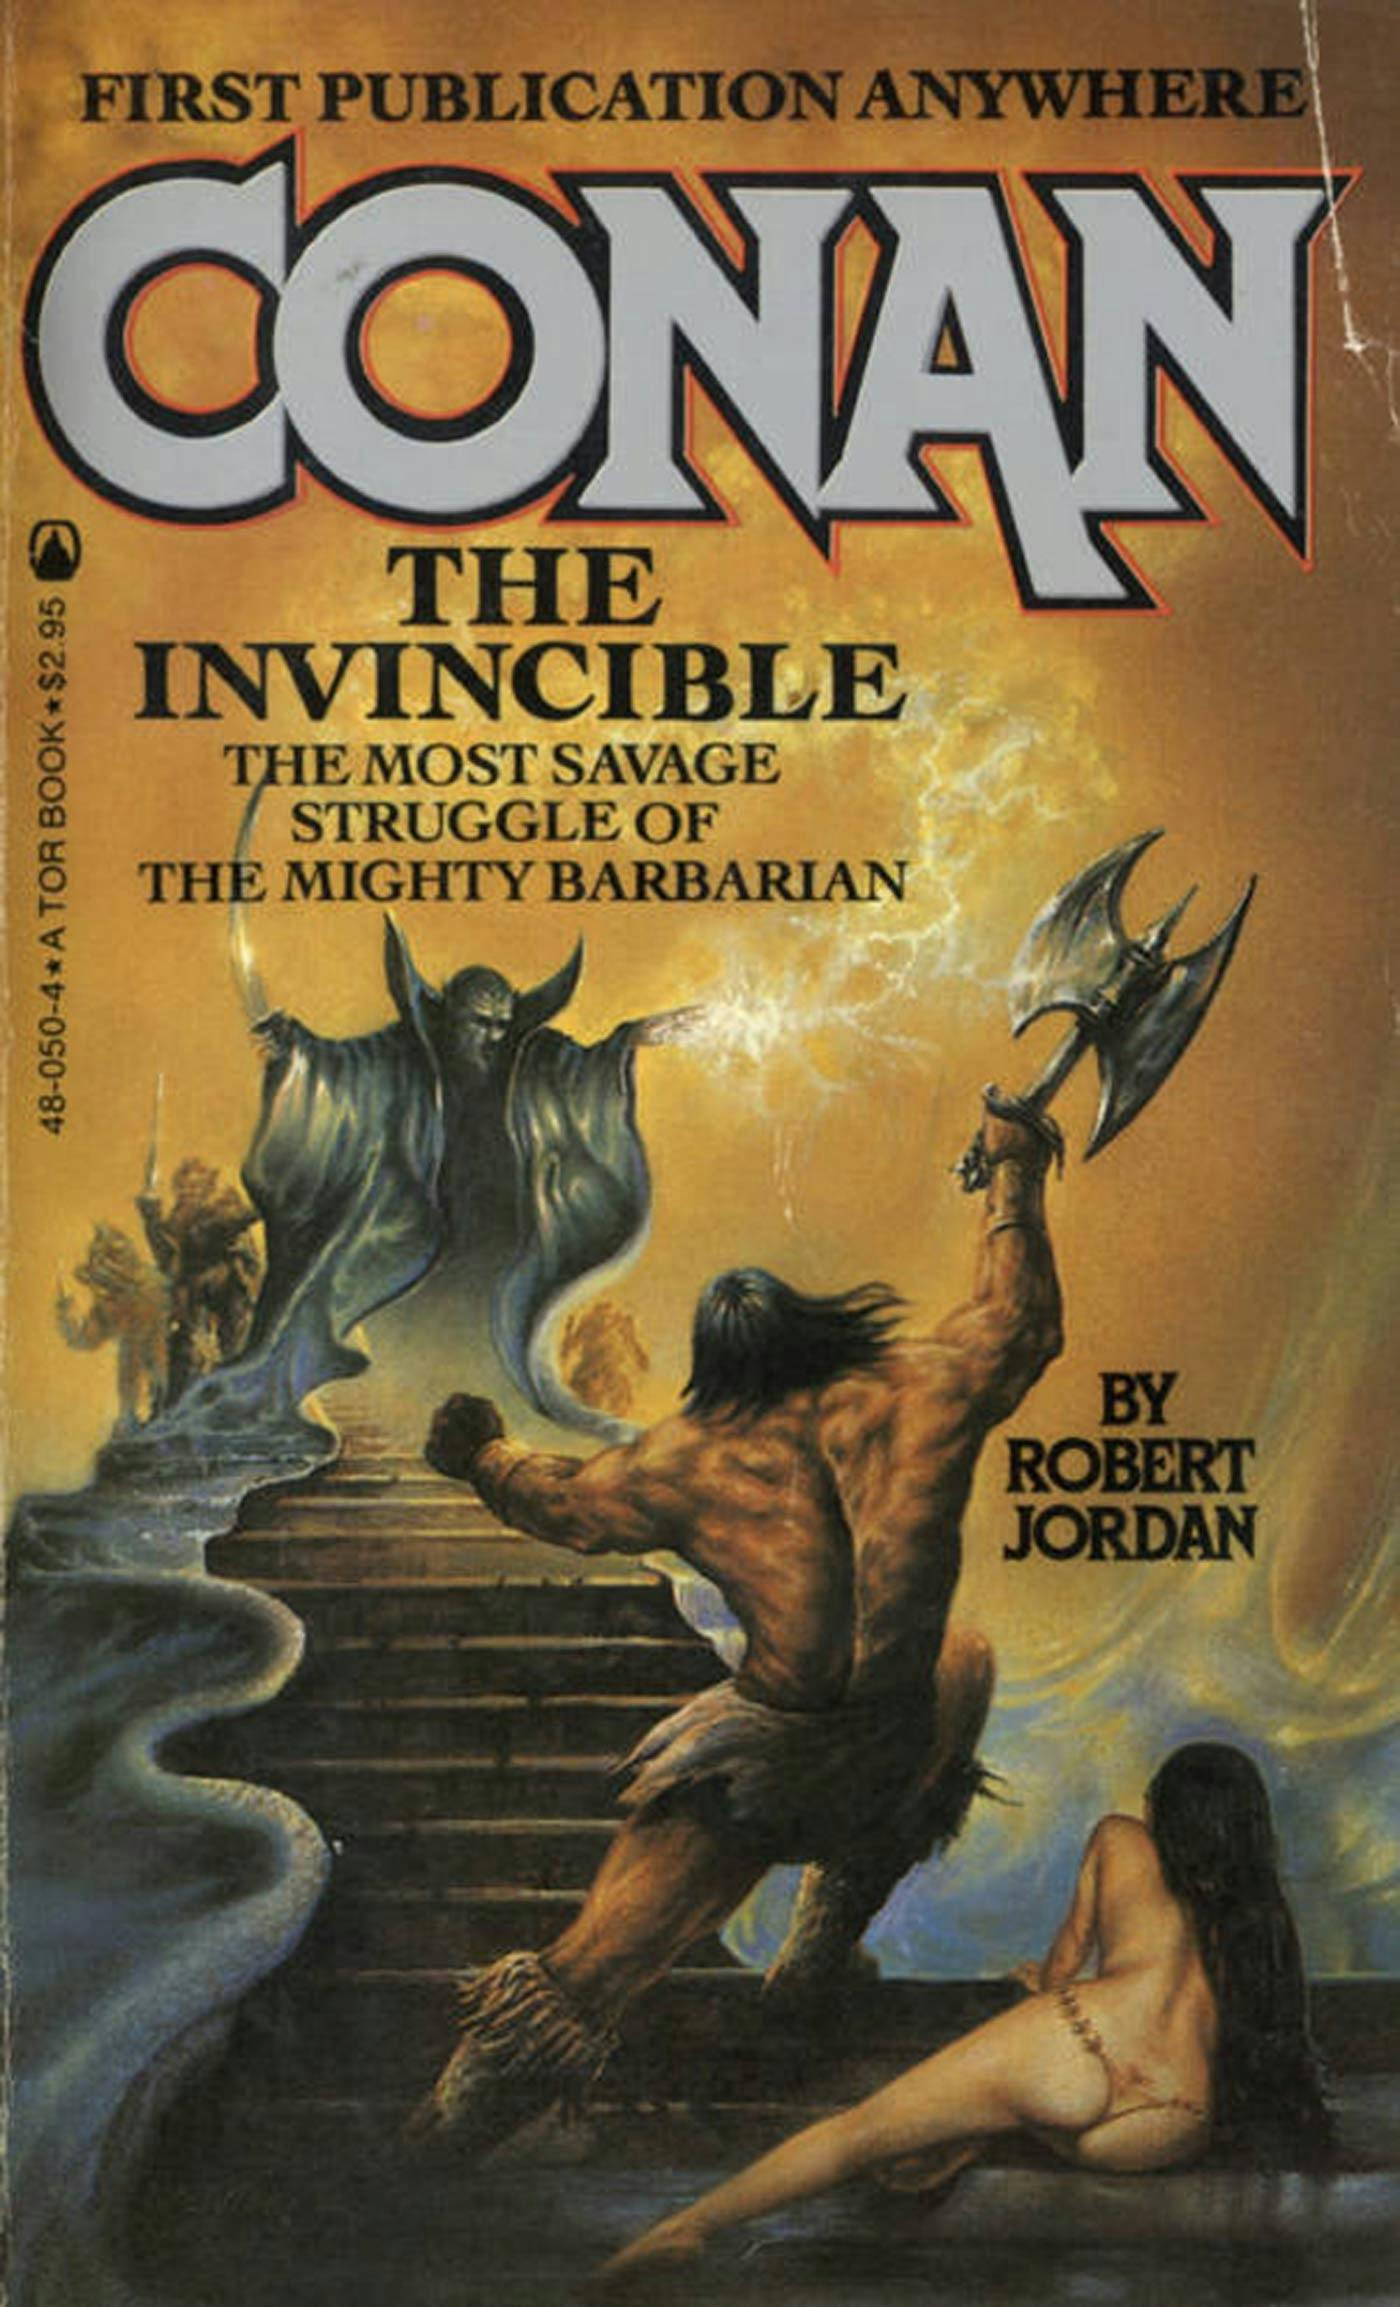 Cover for the book titled as: Conan The Invincible